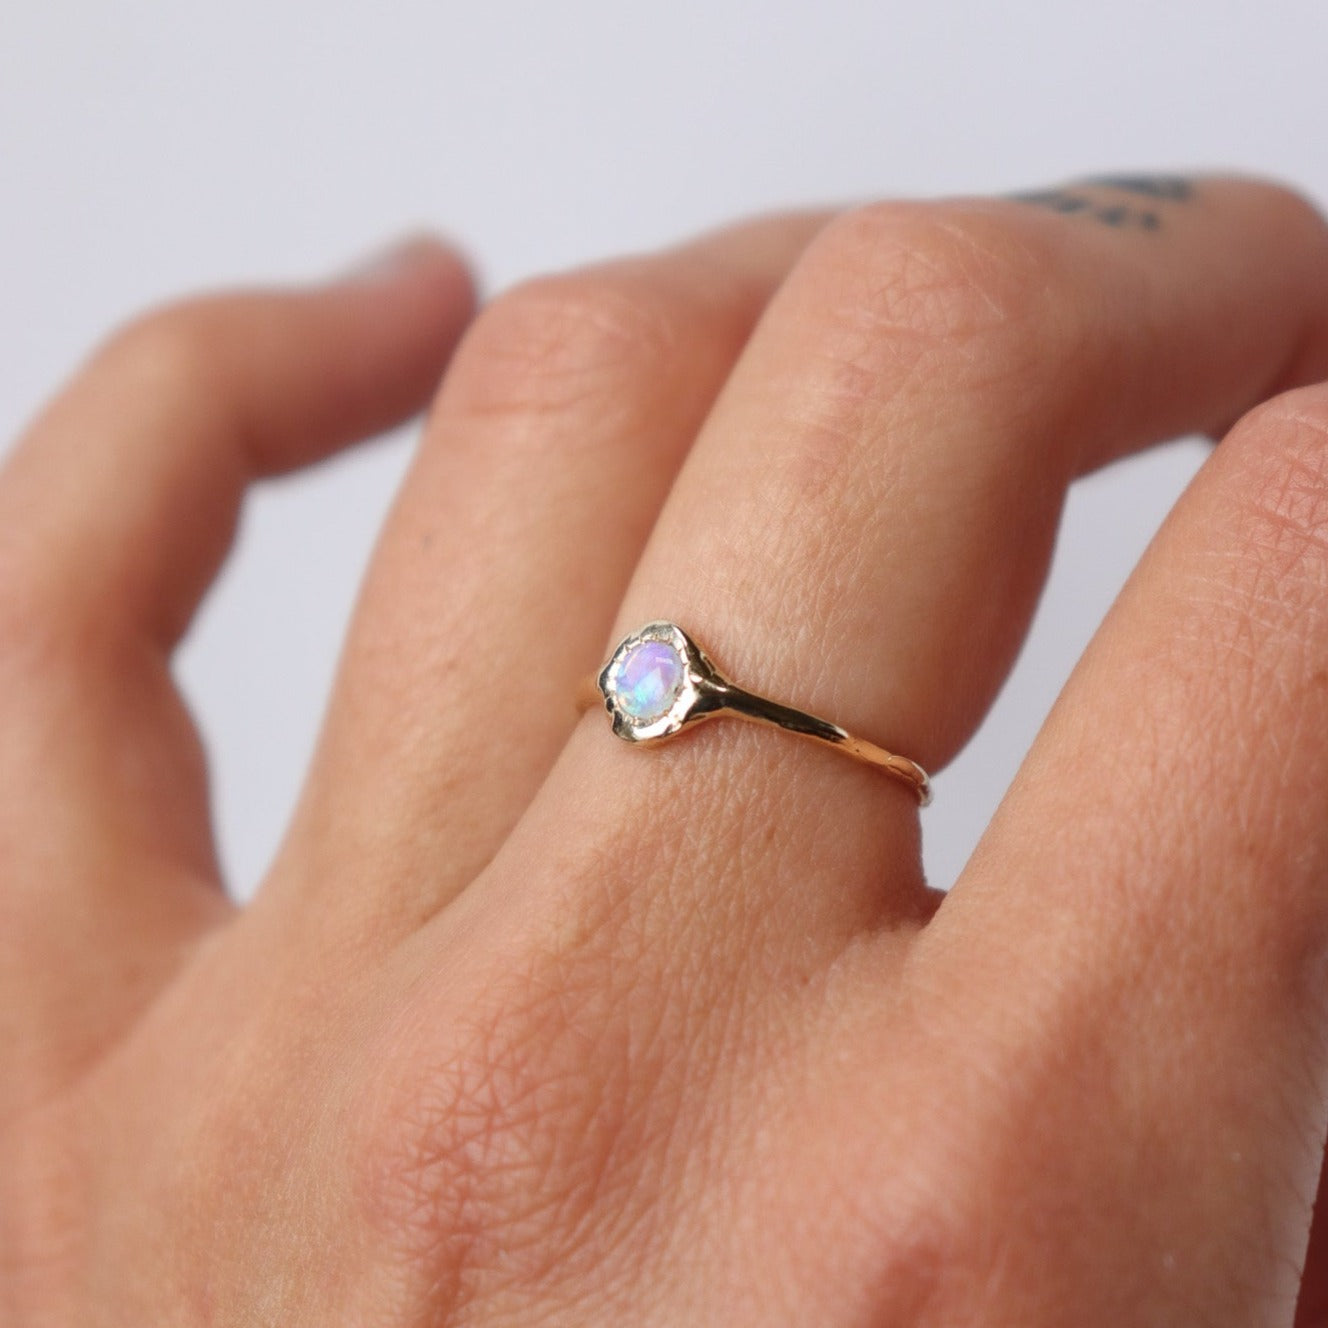 A round opal ring, set on a slender band with small tick-like accents that radiate like a starburst, creating a mesmerizing and celestial jewelry piece, worn on a hand to show scale.